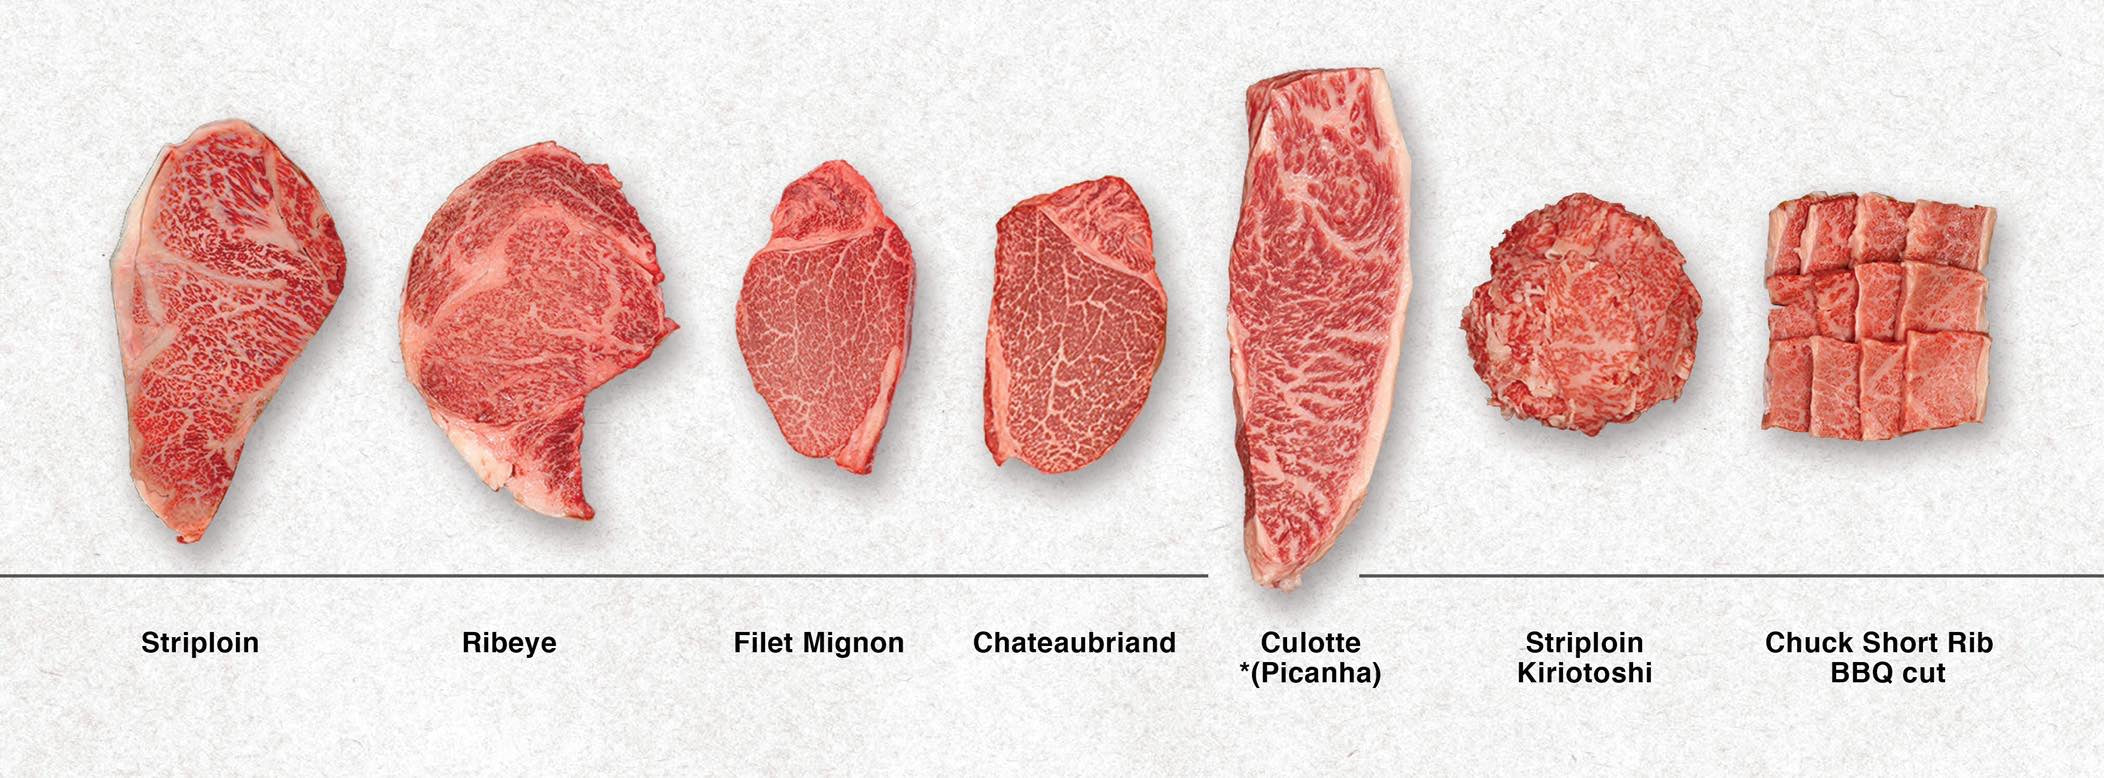 Comparing Cuts: How to Choose the Japanese Wagyu Steak for You – WAGYUMAN